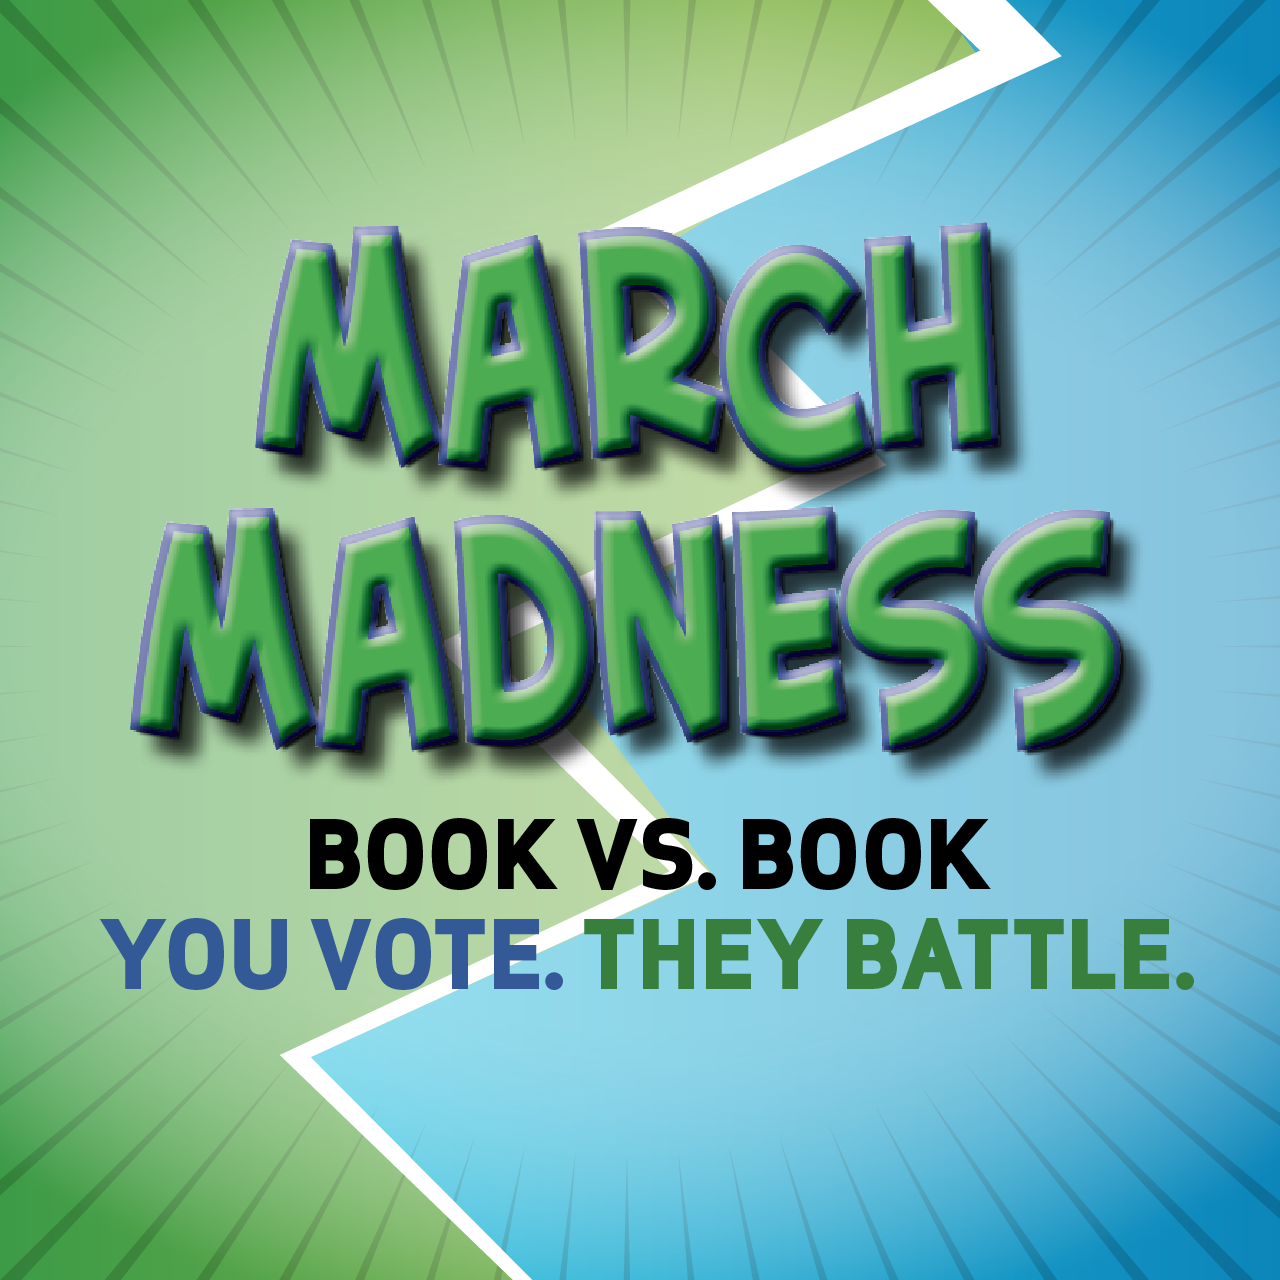 March Madness: Book vs. Book. You vote. They Battle